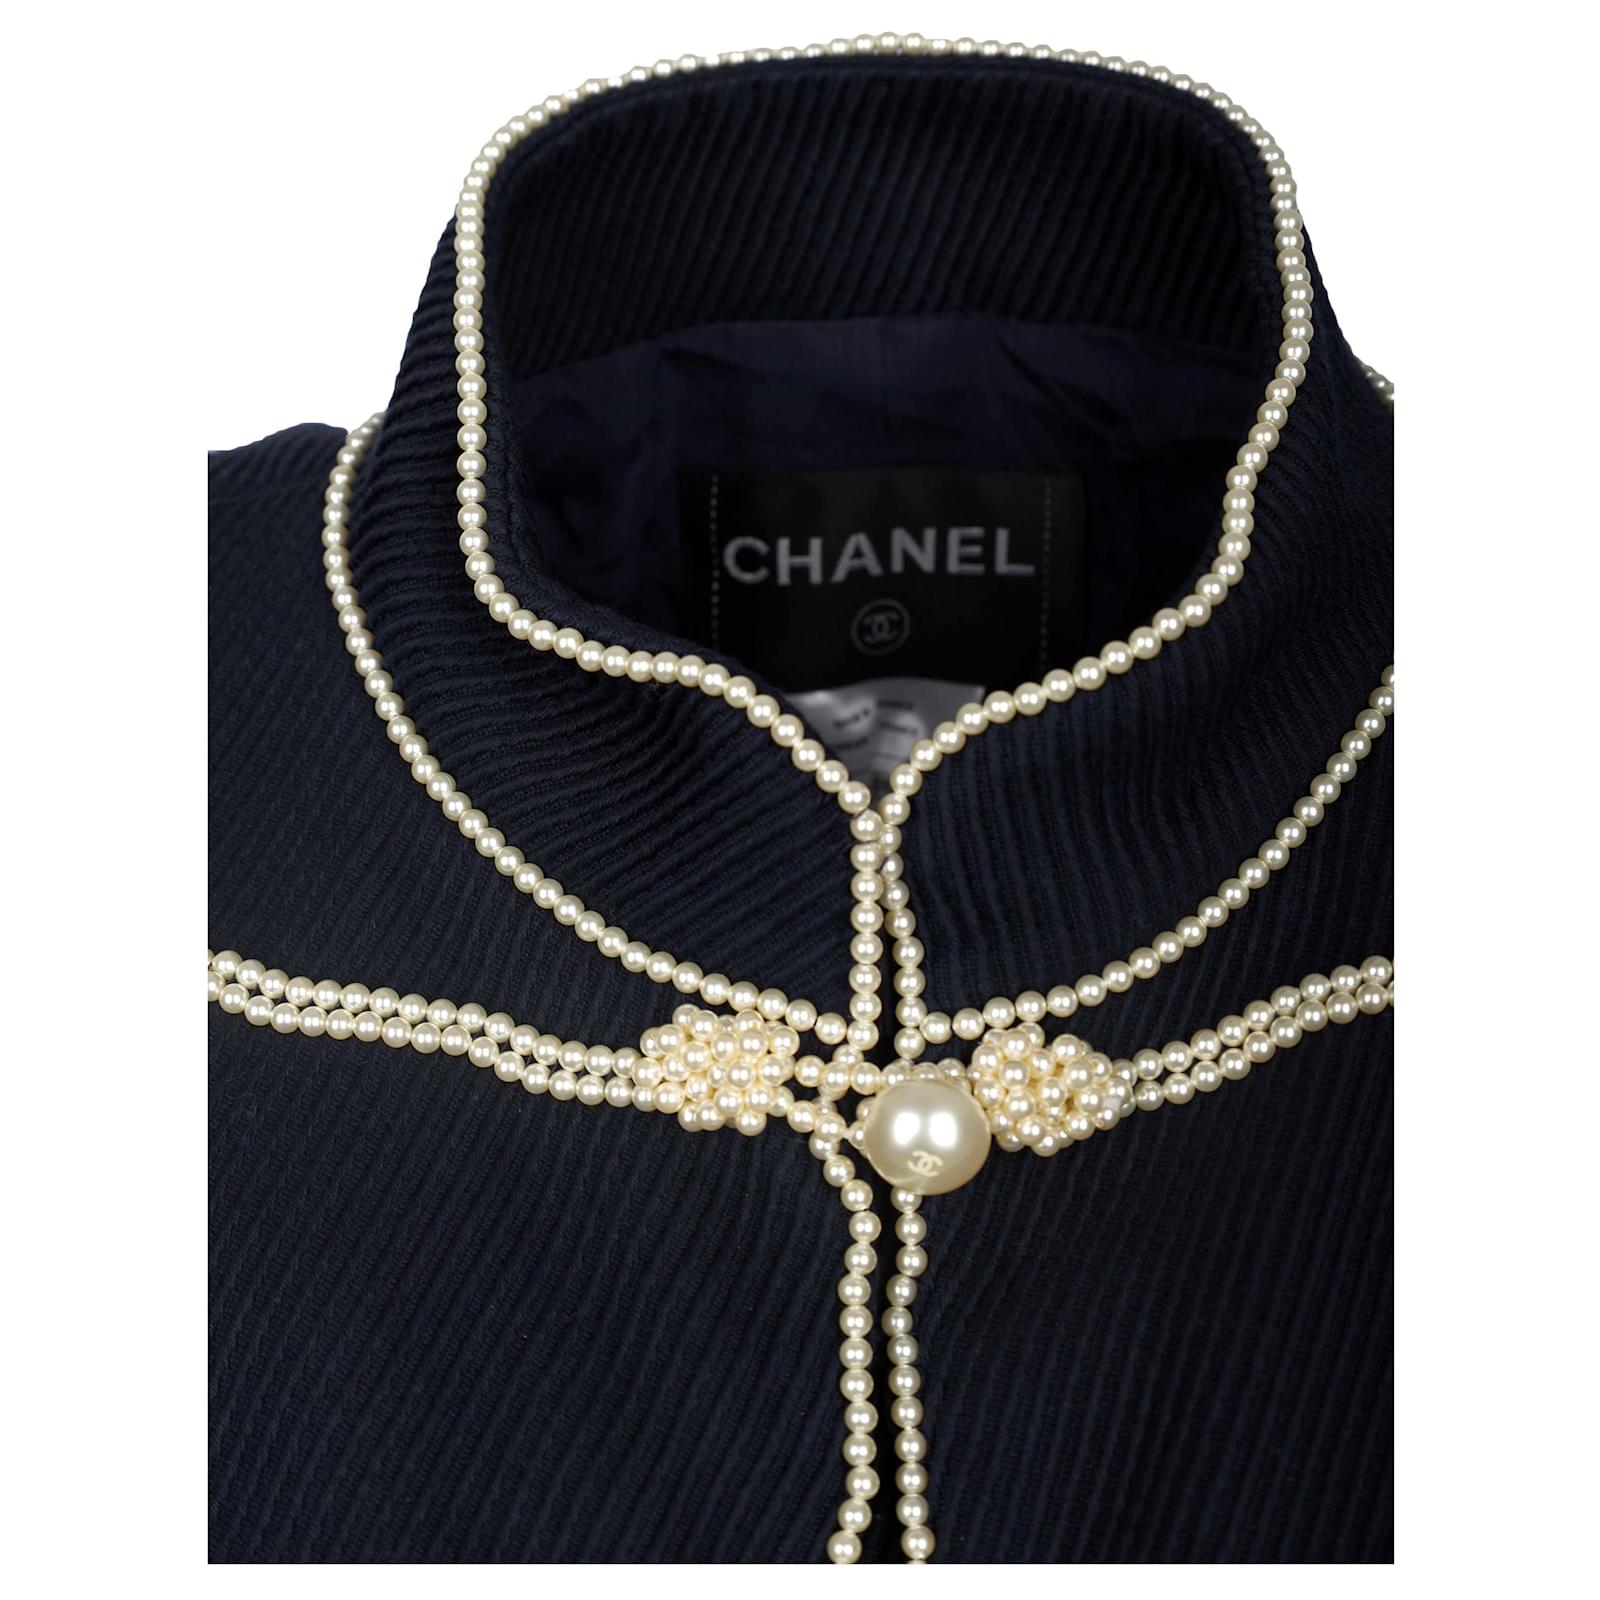 Jackets Chanel Chanel Navy Majorette Jacket with Pearls